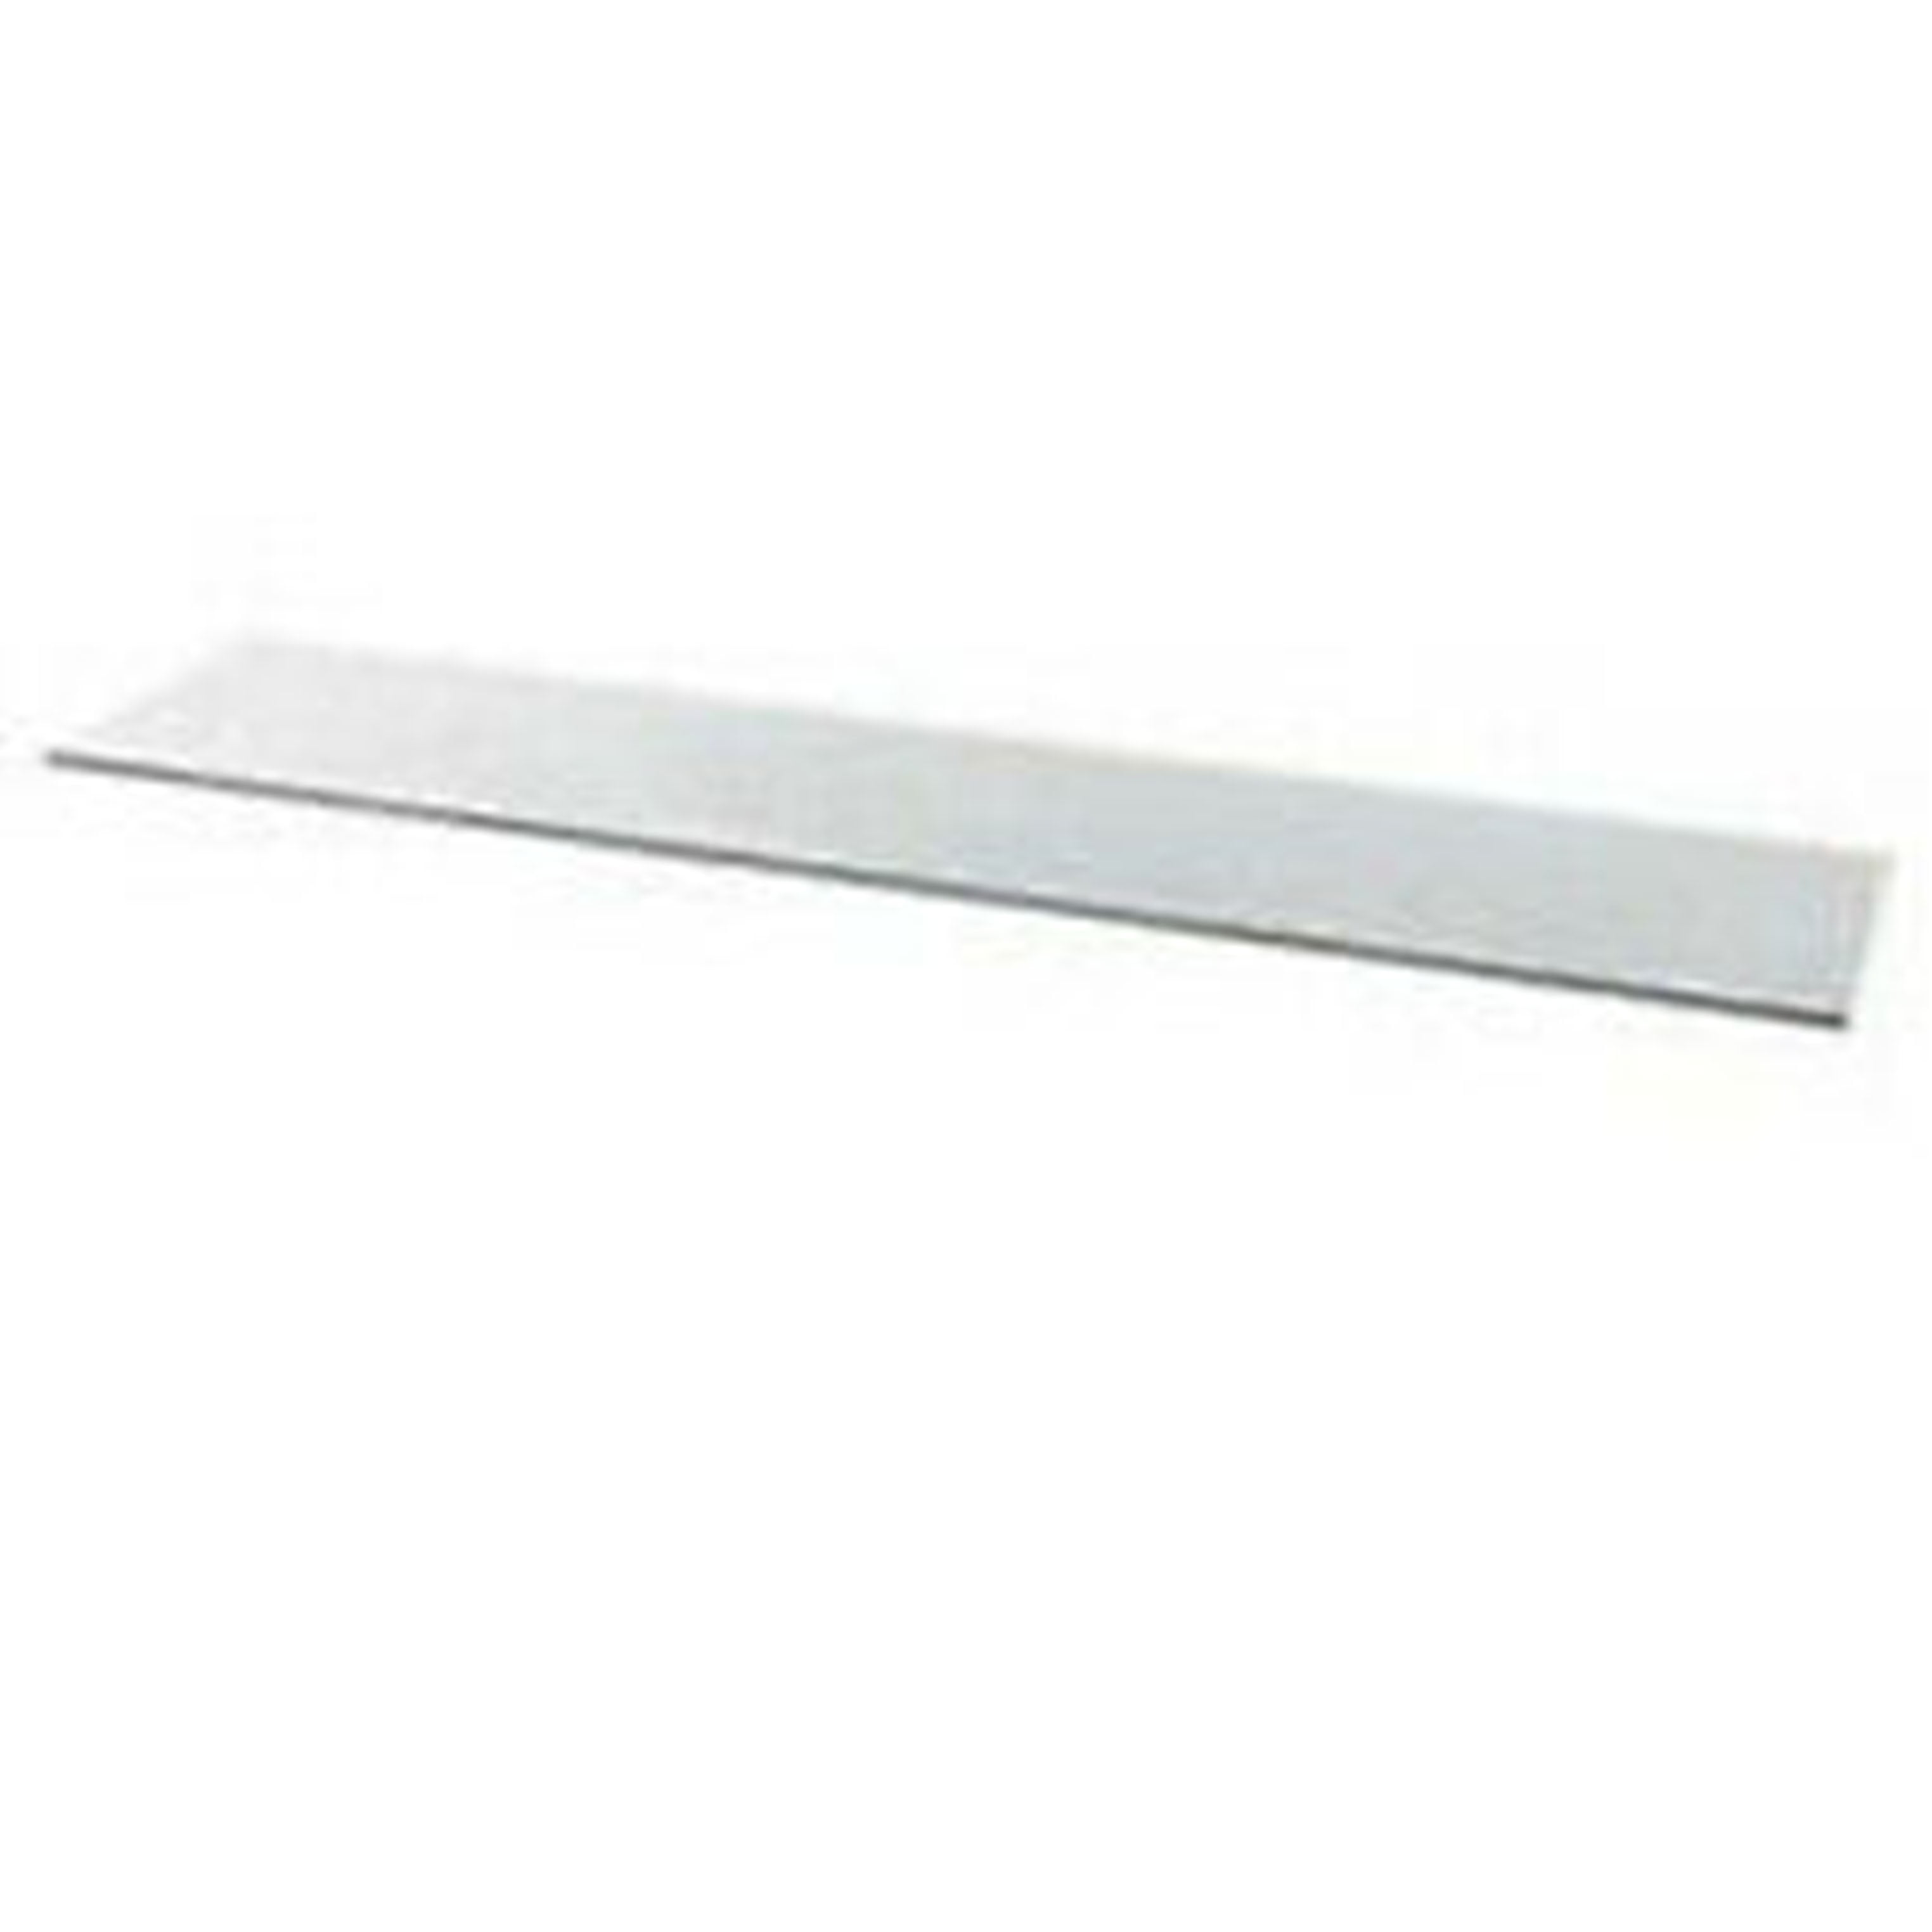 Count of 5 Tempered Glass Shelves 10 X 48 Inches